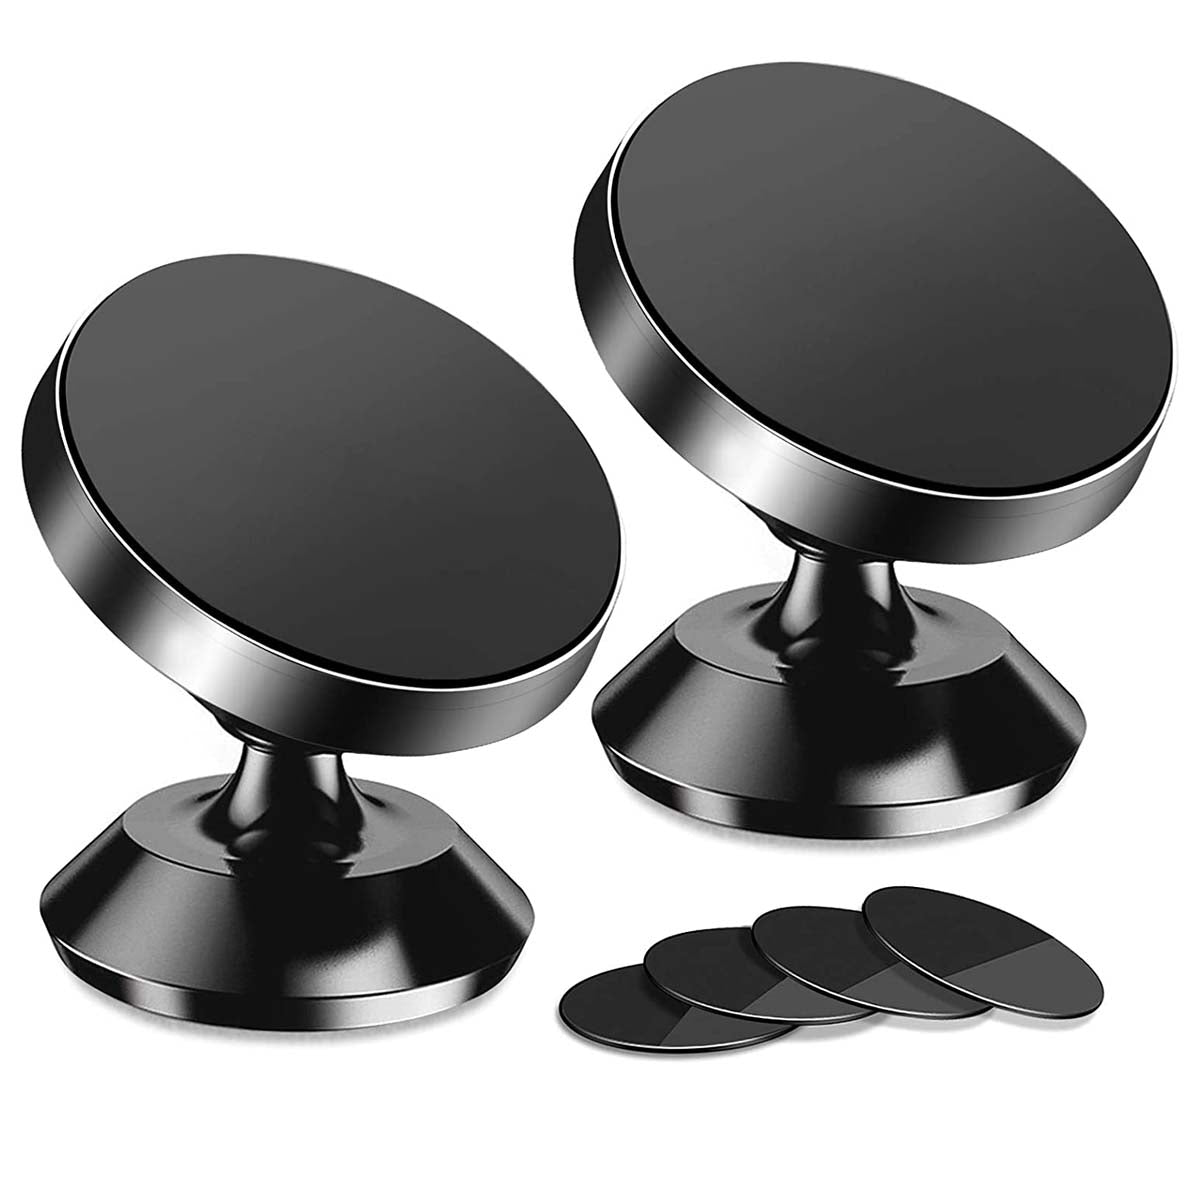 [2 Pack ] Magnetic Phone Mount, Custom For Cars, [ Super Strong Magnet ] [ with 4 Metal Plate ] car Magnetic Phone Holder, [ 360° Rotation ] Universal Dashboard car Mount Fits All Cell Phones, Car Accessories JE13982